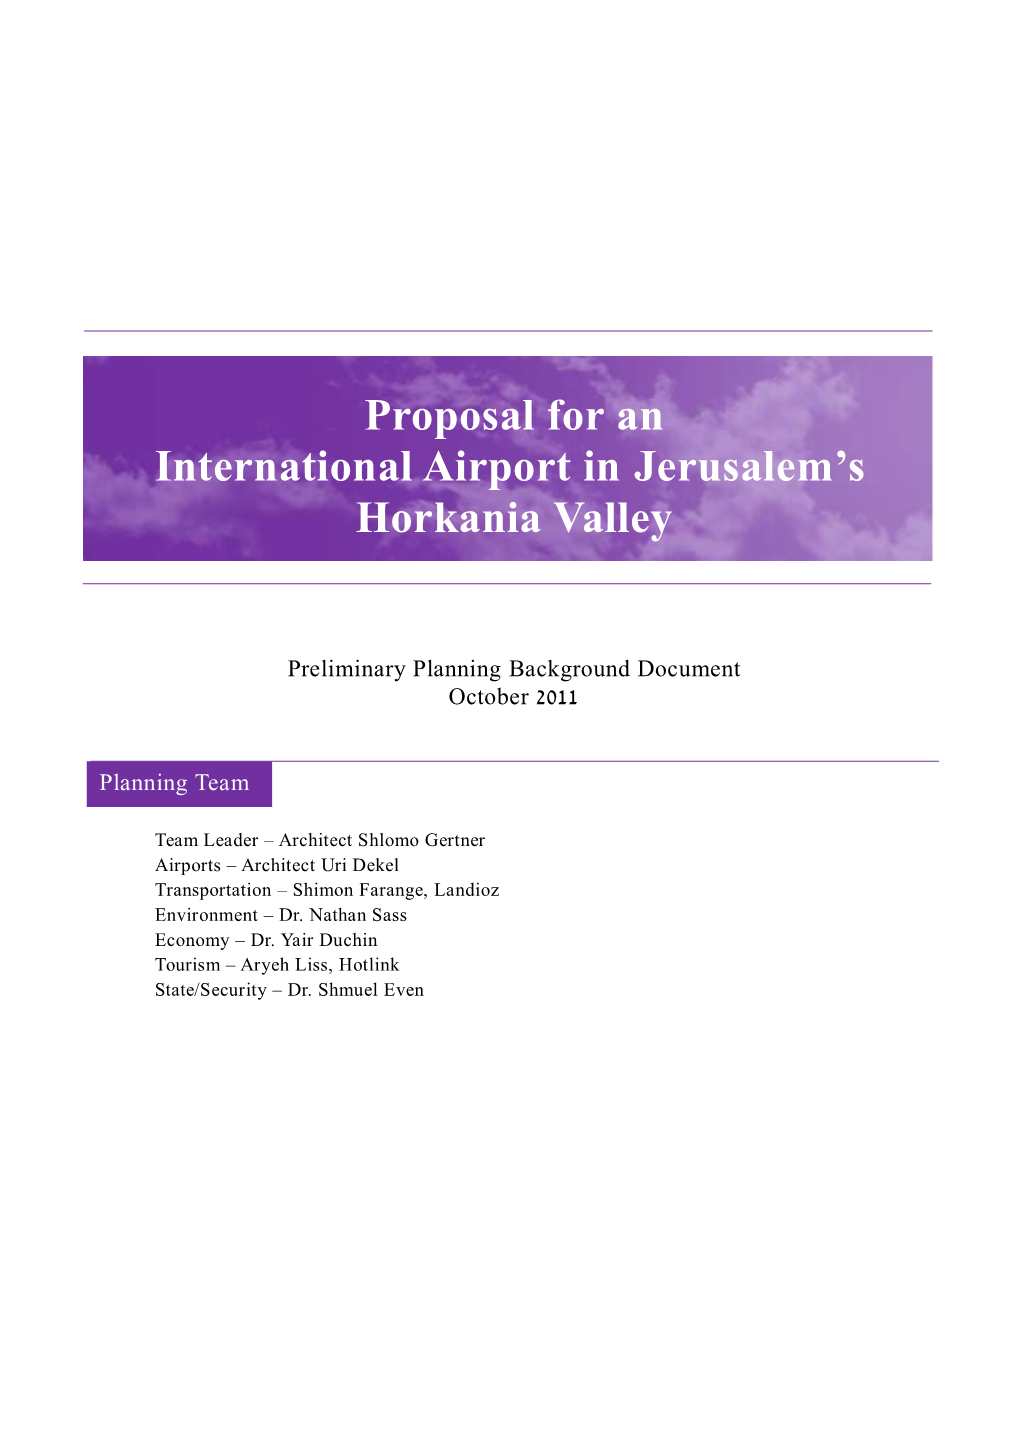 Proposal for an International Airport in Jerusalem's Horkania Valley